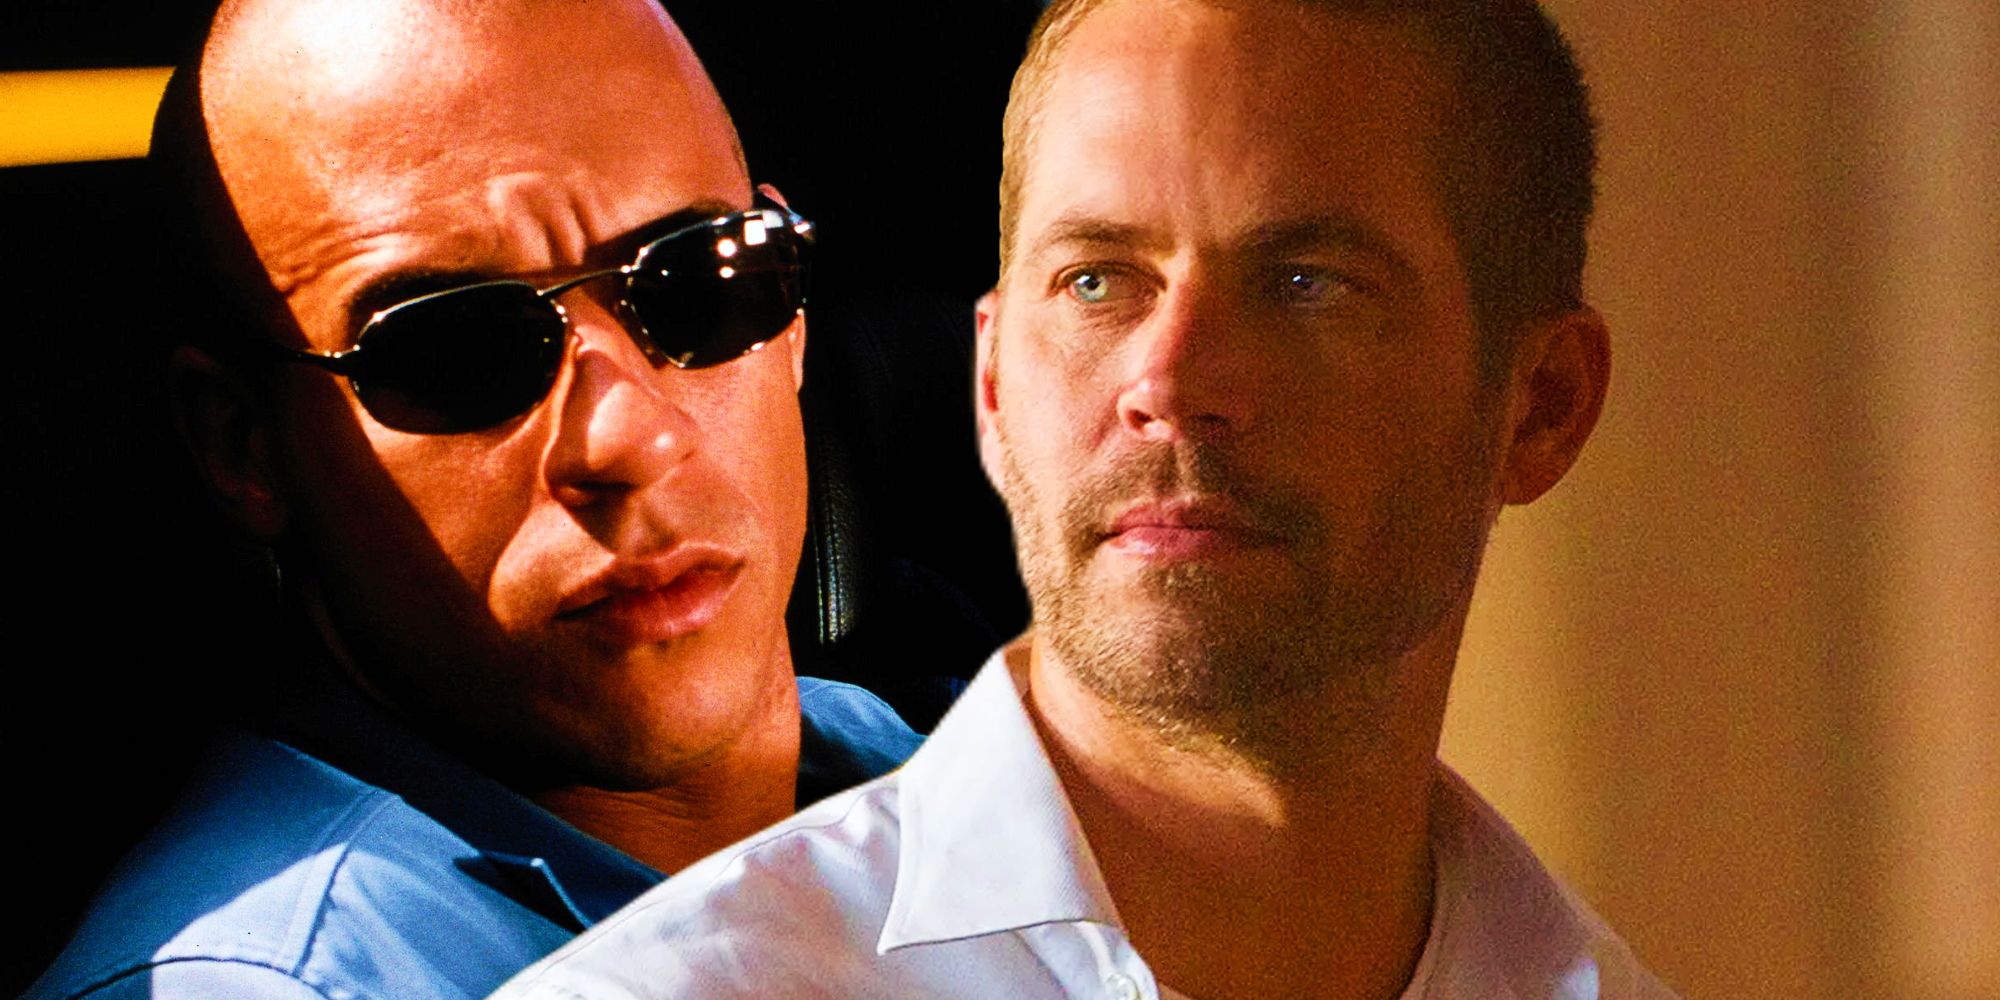 Dominic Toretto and Brian O'Conner in Fast and Furious